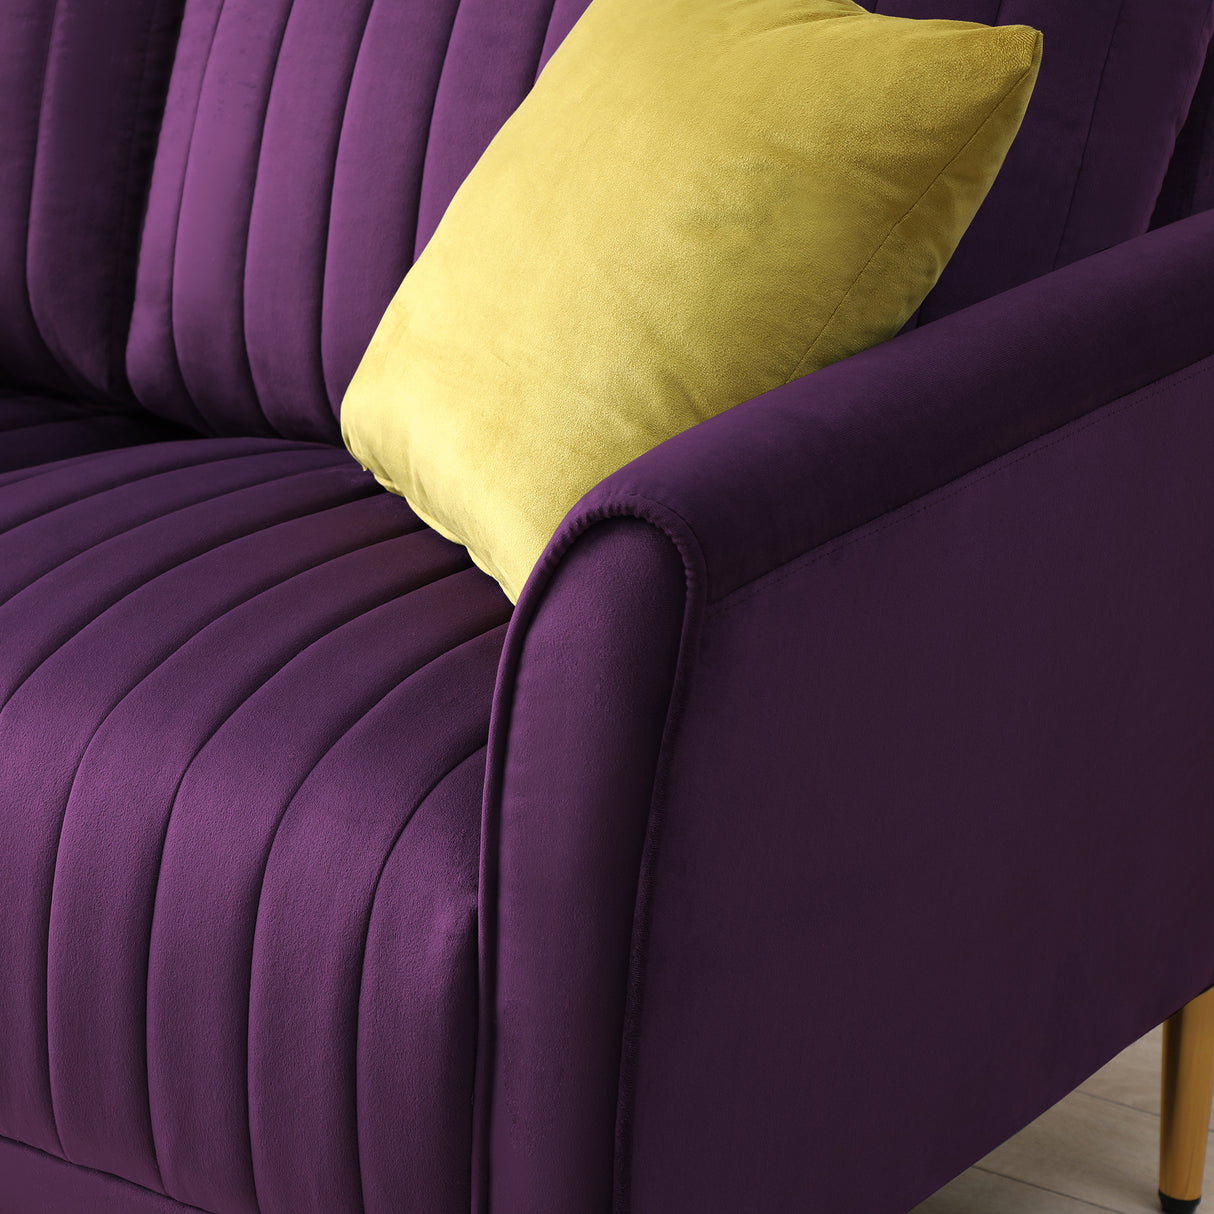 Modern Soft Velvet Accent Chair Living Room Chair Bedroom Chair Home Chair With Gold Legs, Purple Home Elegance USA